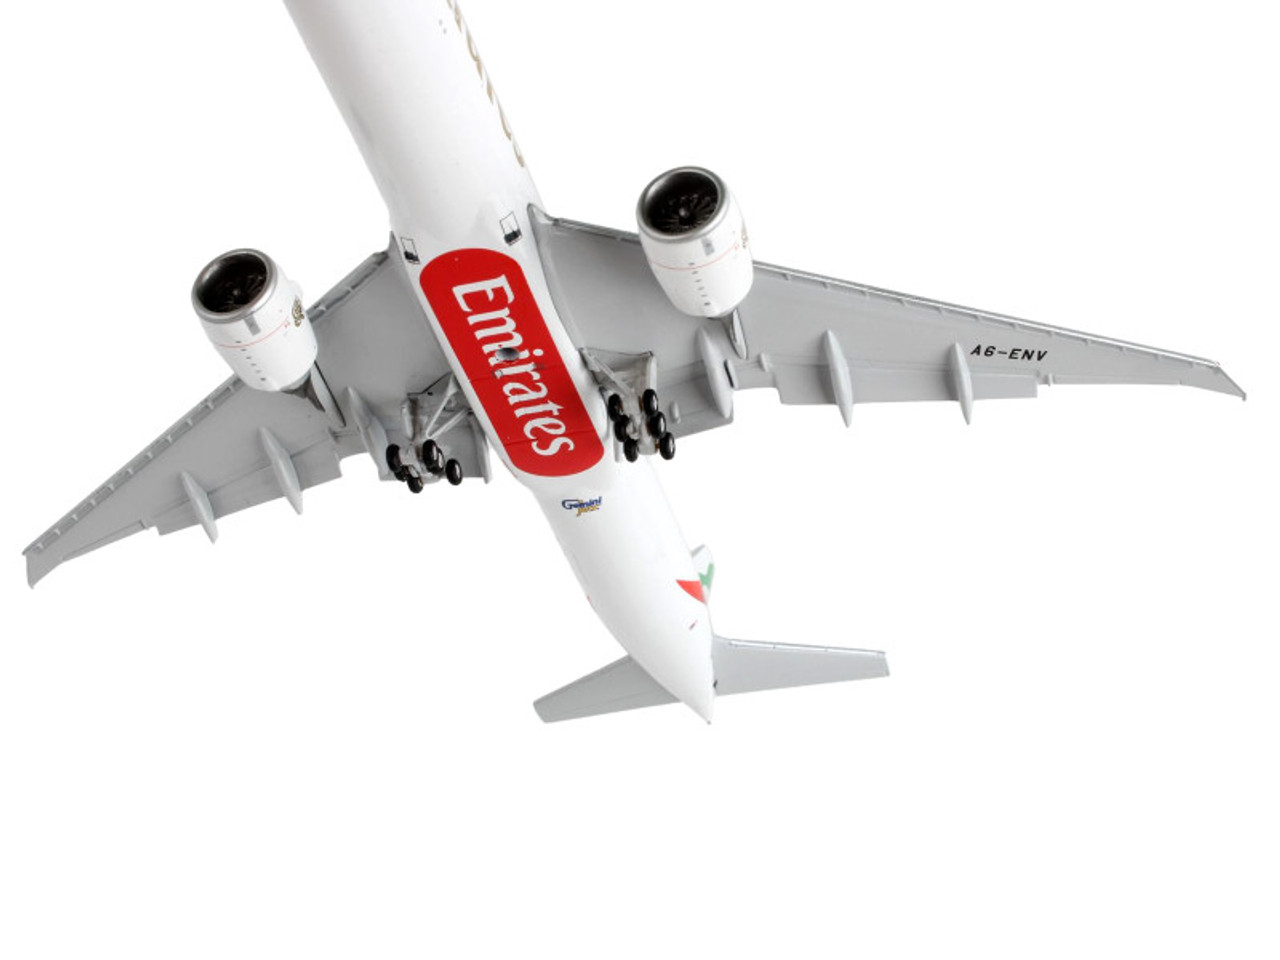 Boeing 777-300ER Commercial Aircraft with Flaps Down "Emirates Airlines" White with Tail Stripes 1/400 Diecast Model Airplane by GeminiJets